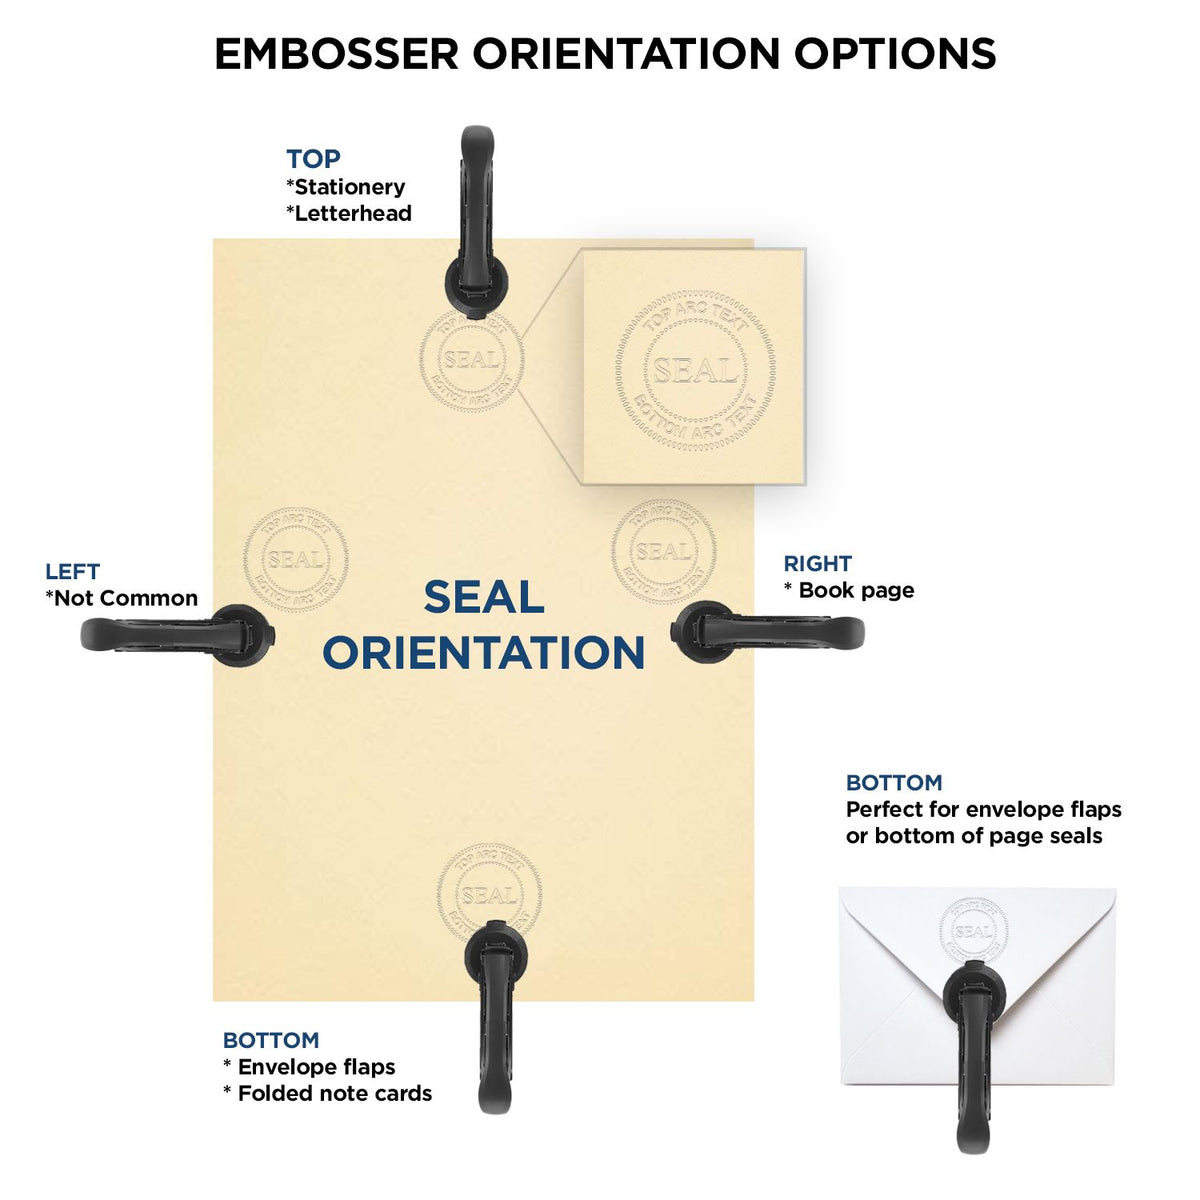 An infographic for the Soft Pocket South Dakota Landscape Architect Embosser showing embosser orientation, this is showing examples of a top, bottom, right and left insert.